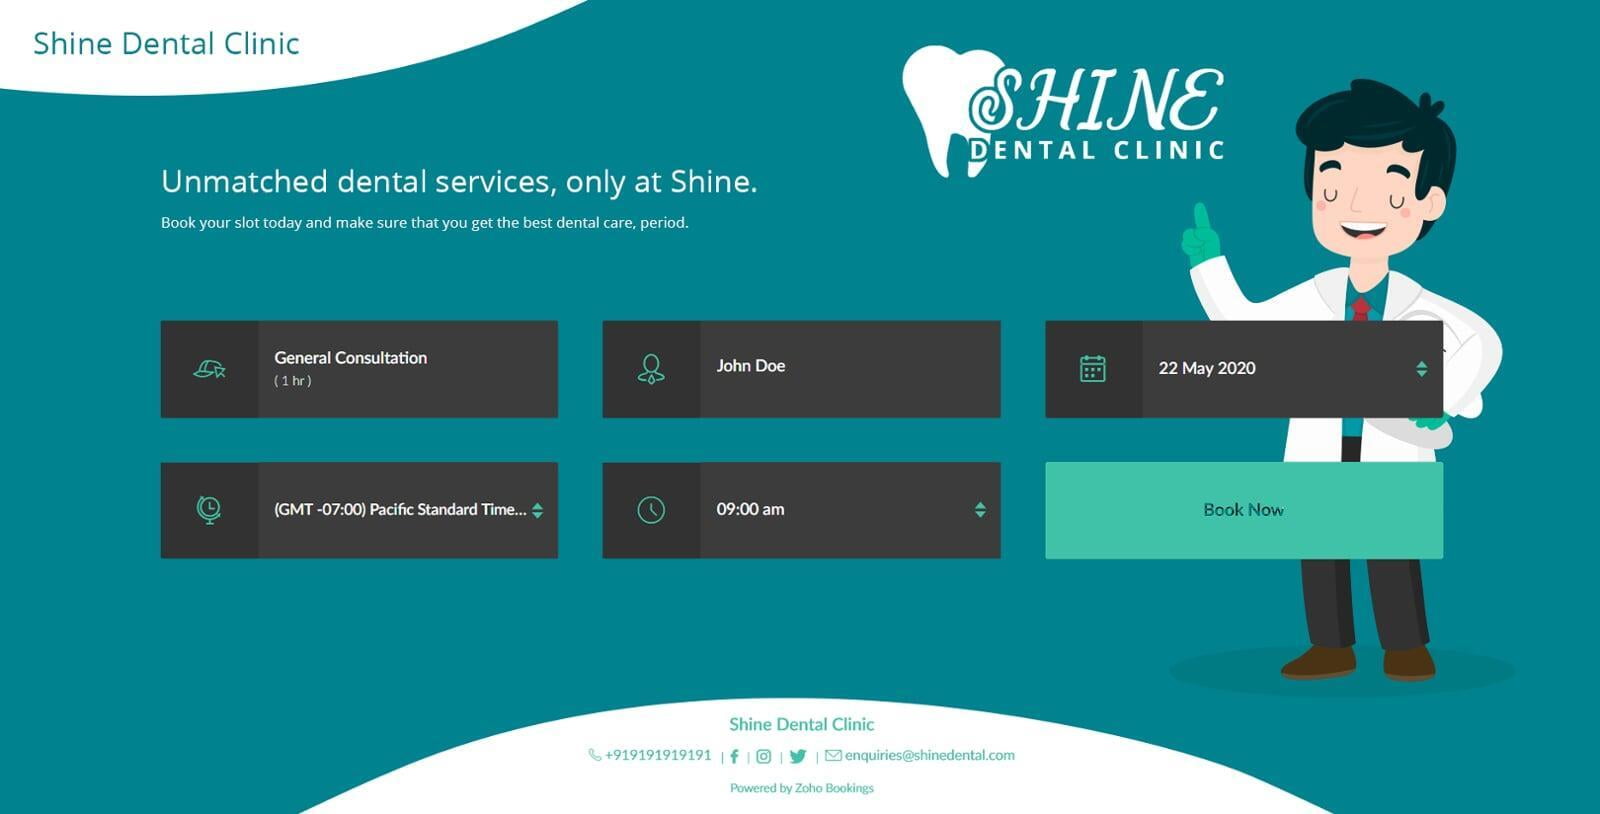 zoho bookings for healthcare